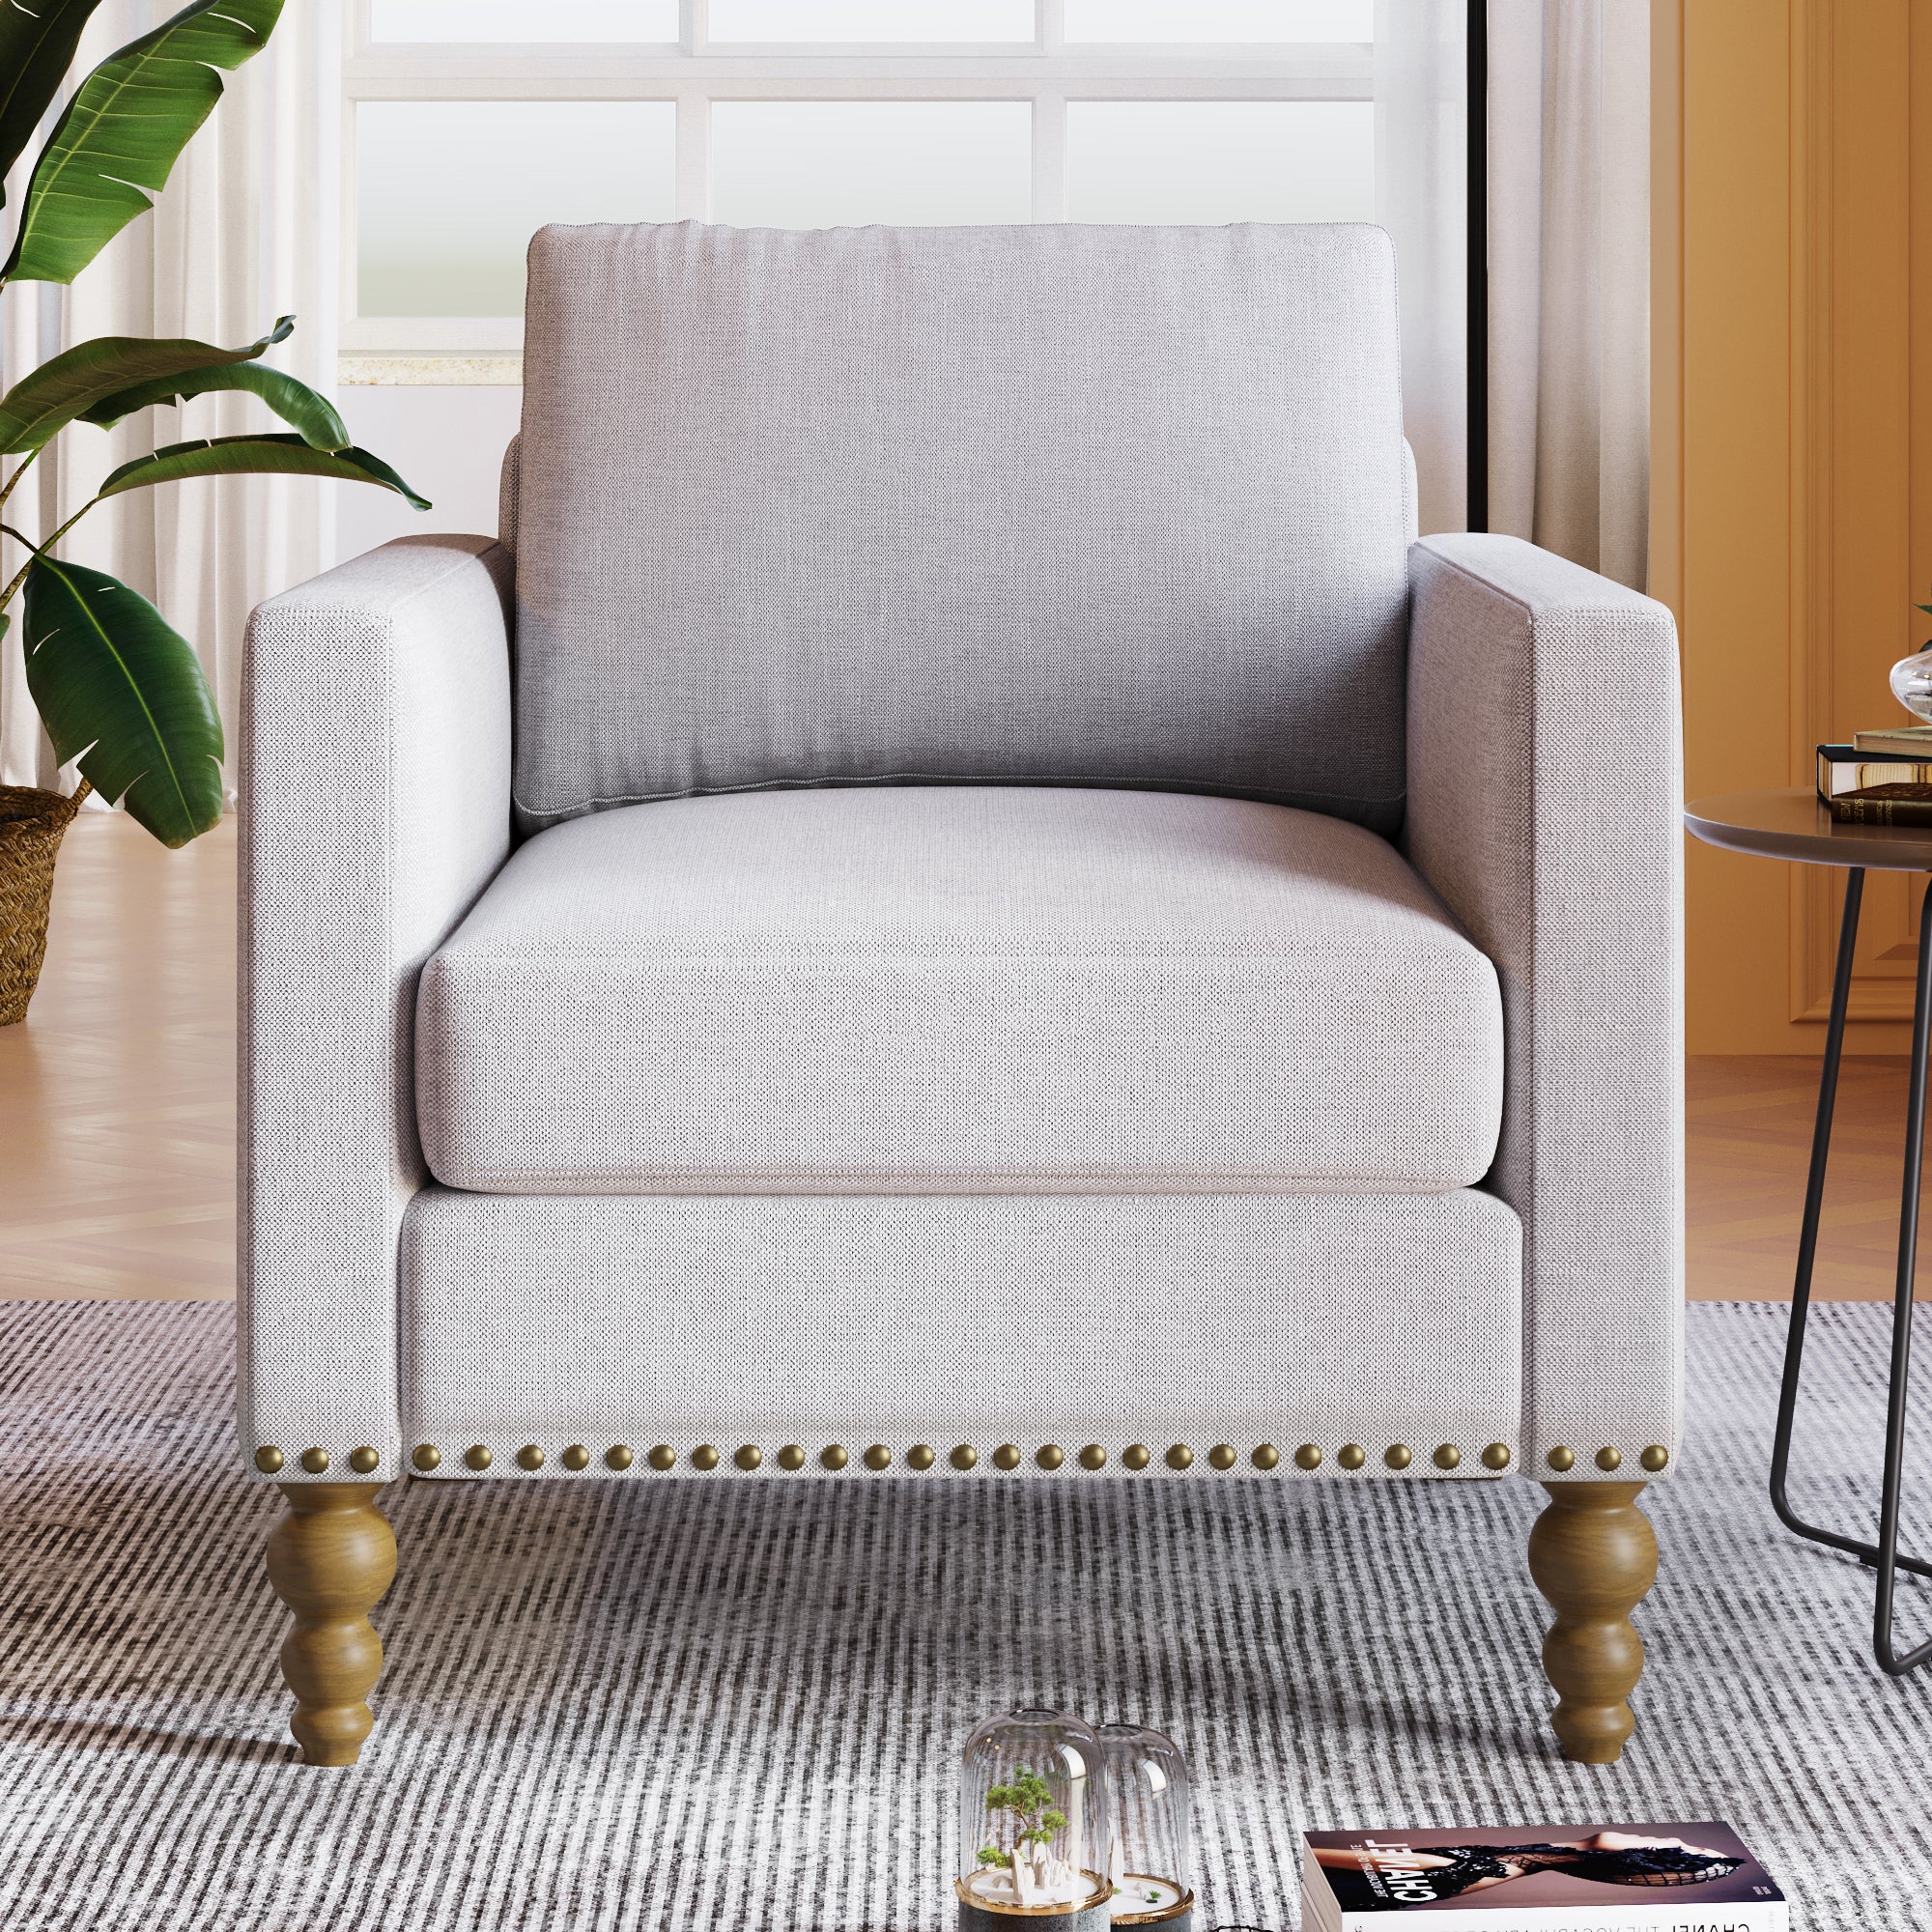 Beige Linen Accent Armchair with Bronze Nailhead Trim and Wooden Legs